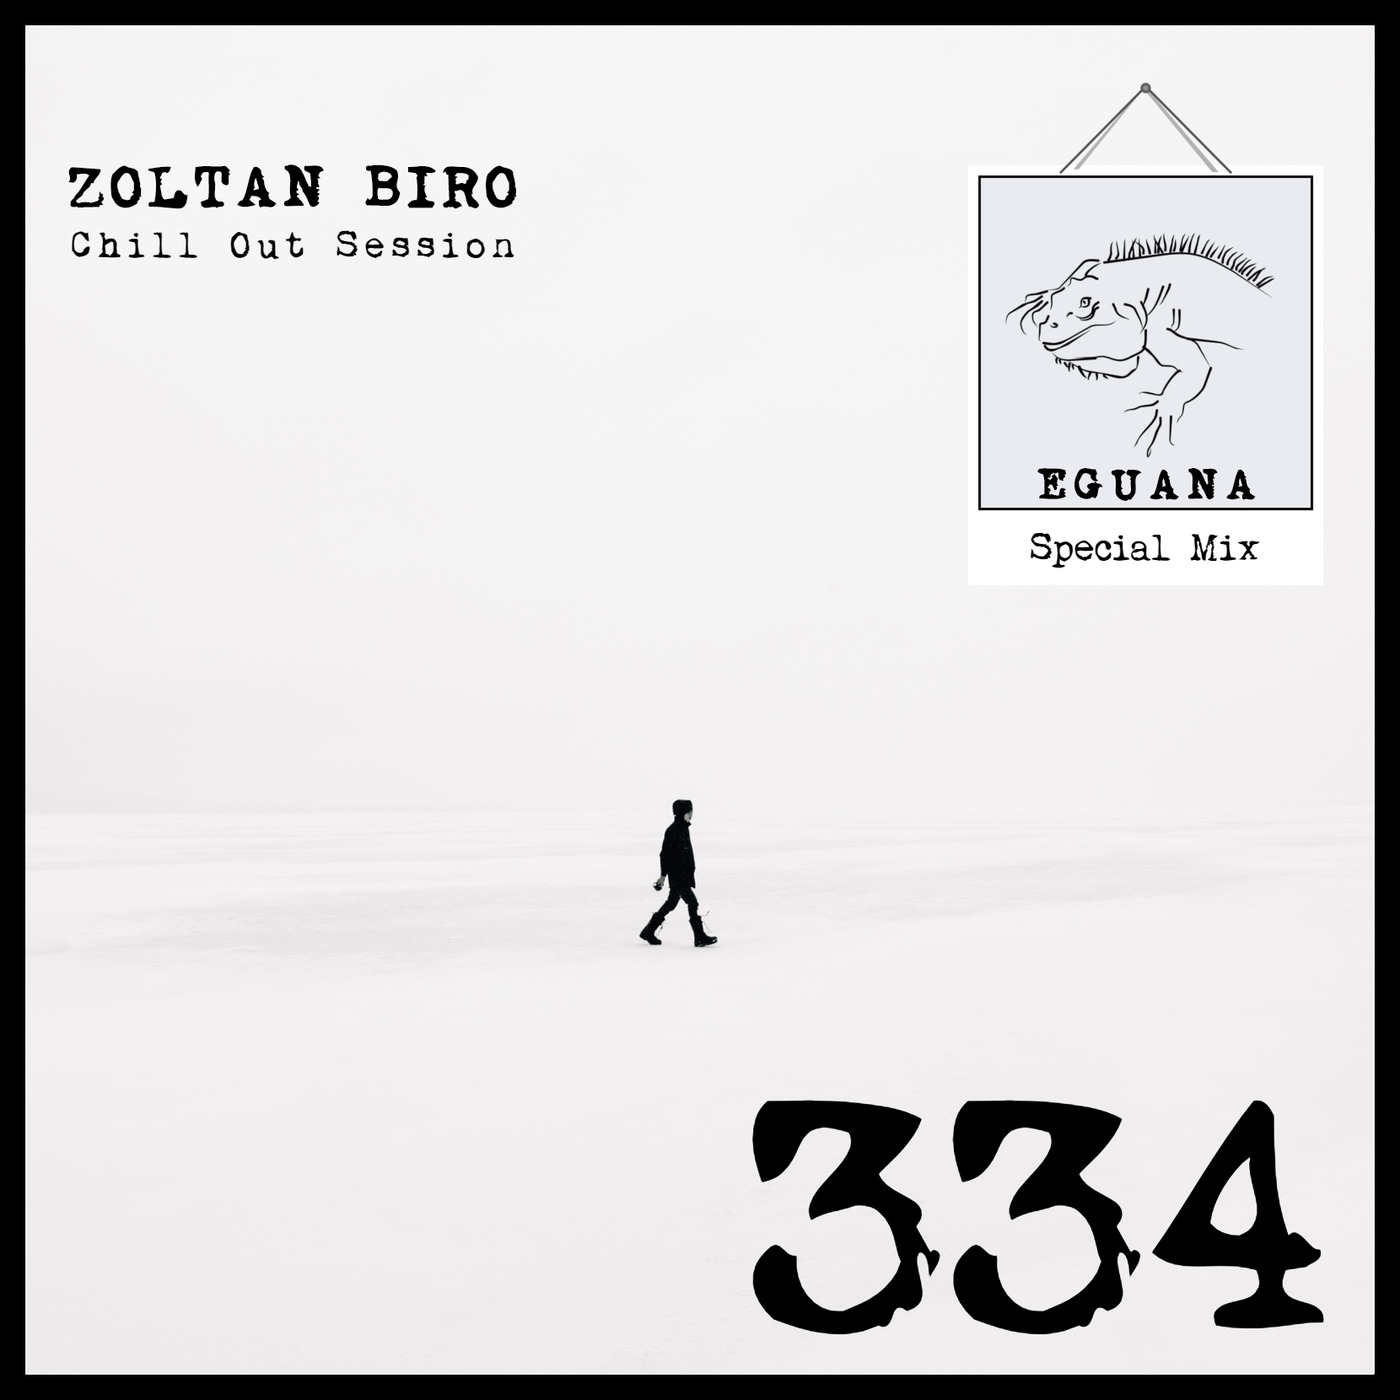 Zoltan Biro - Chill Out Session 334 [including: Eguana Special Mix]